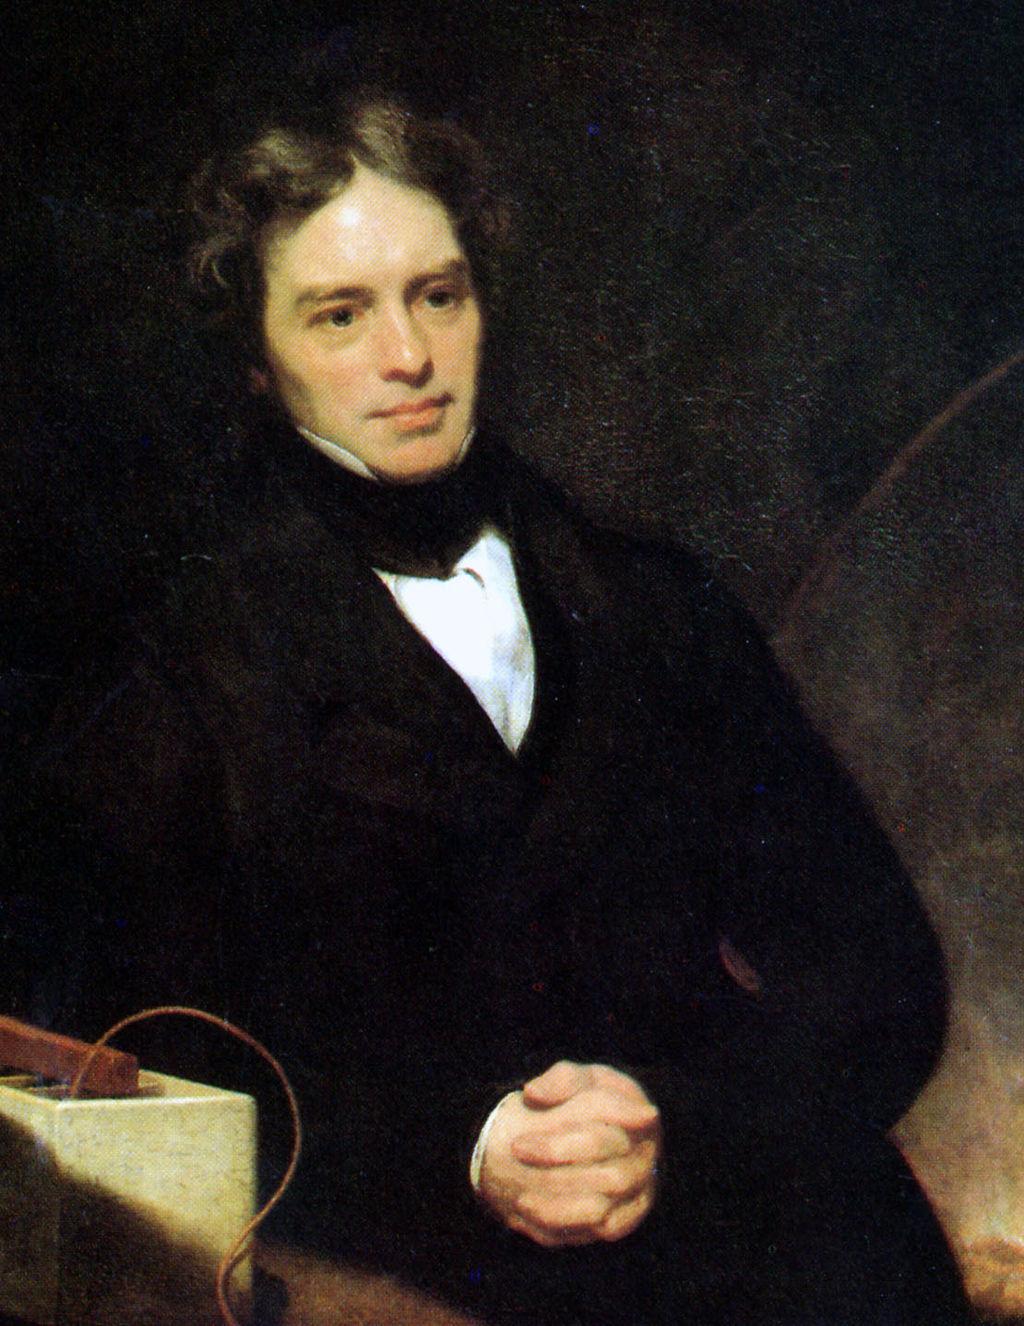 Experiments conducted by Michael Faraday and Joseph Henry in 1831 showed that an emf can be induced in a circuit by a changing magnetic field British physicist and chemist Great experimental